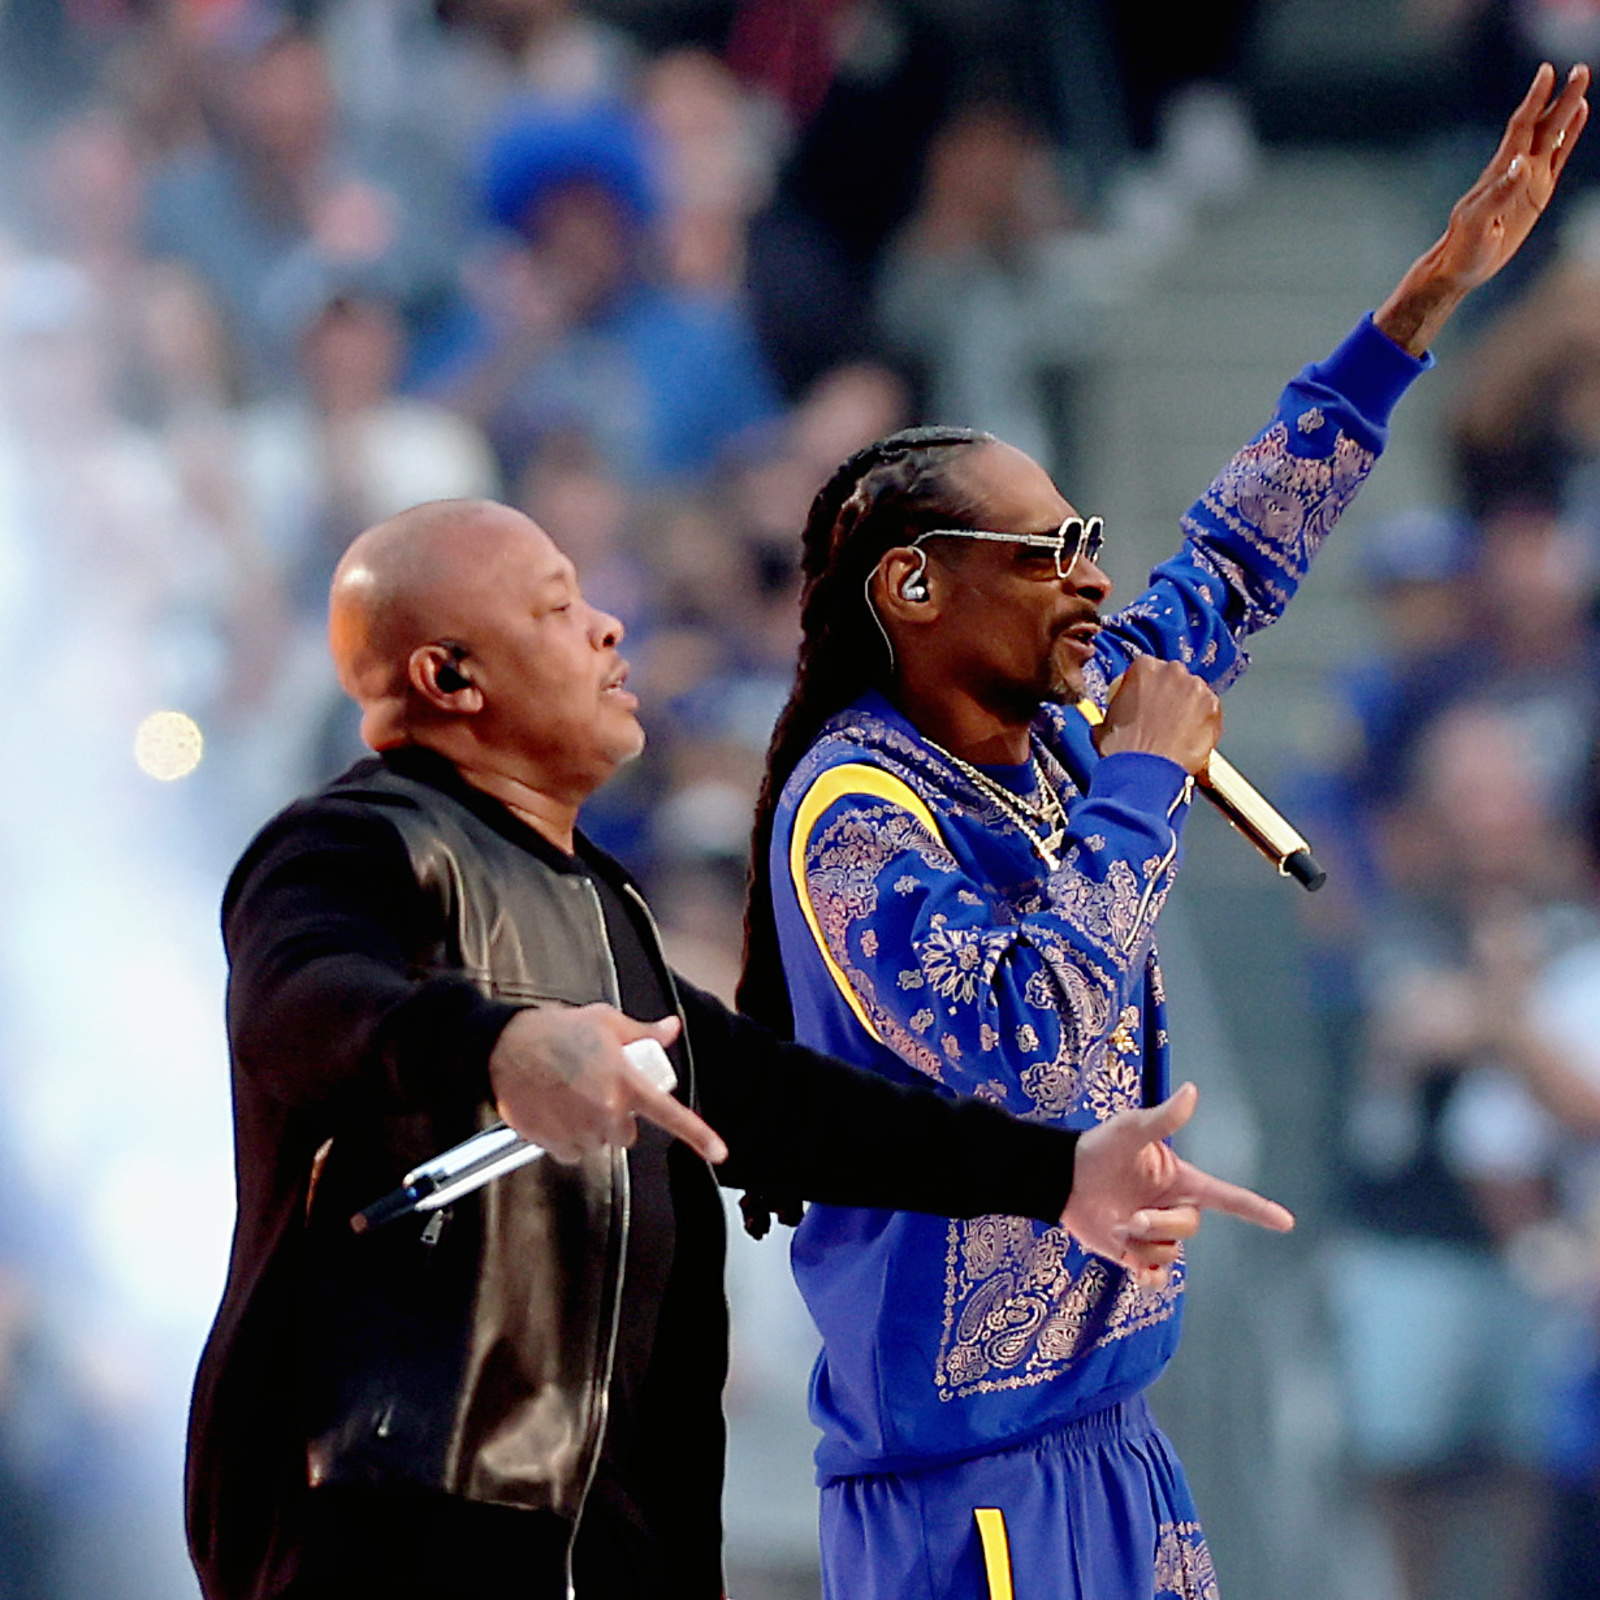 Super Bowl halftime show: Fans react to Kendrick Lamar, Snoop Dogg and more  - Sports Illustrated